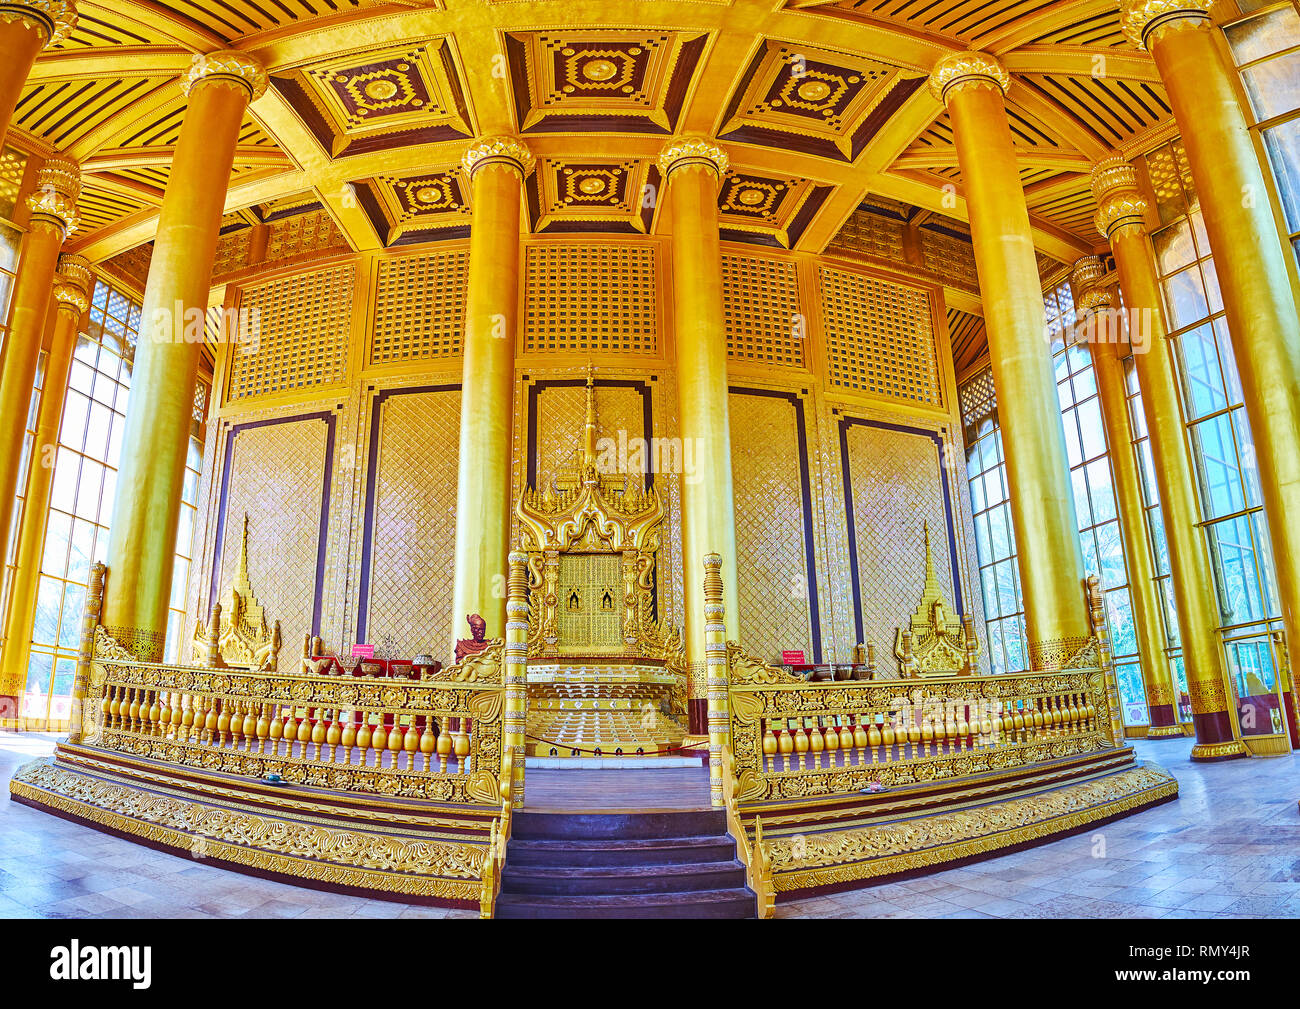 BAGO, MYANMAR - FEBRUARY 15, 2018: The richly decorated interior of Great Audience Hall of Kanbawzathadi Golden palace with Thihathana (Lion) Trone in Stock Photo